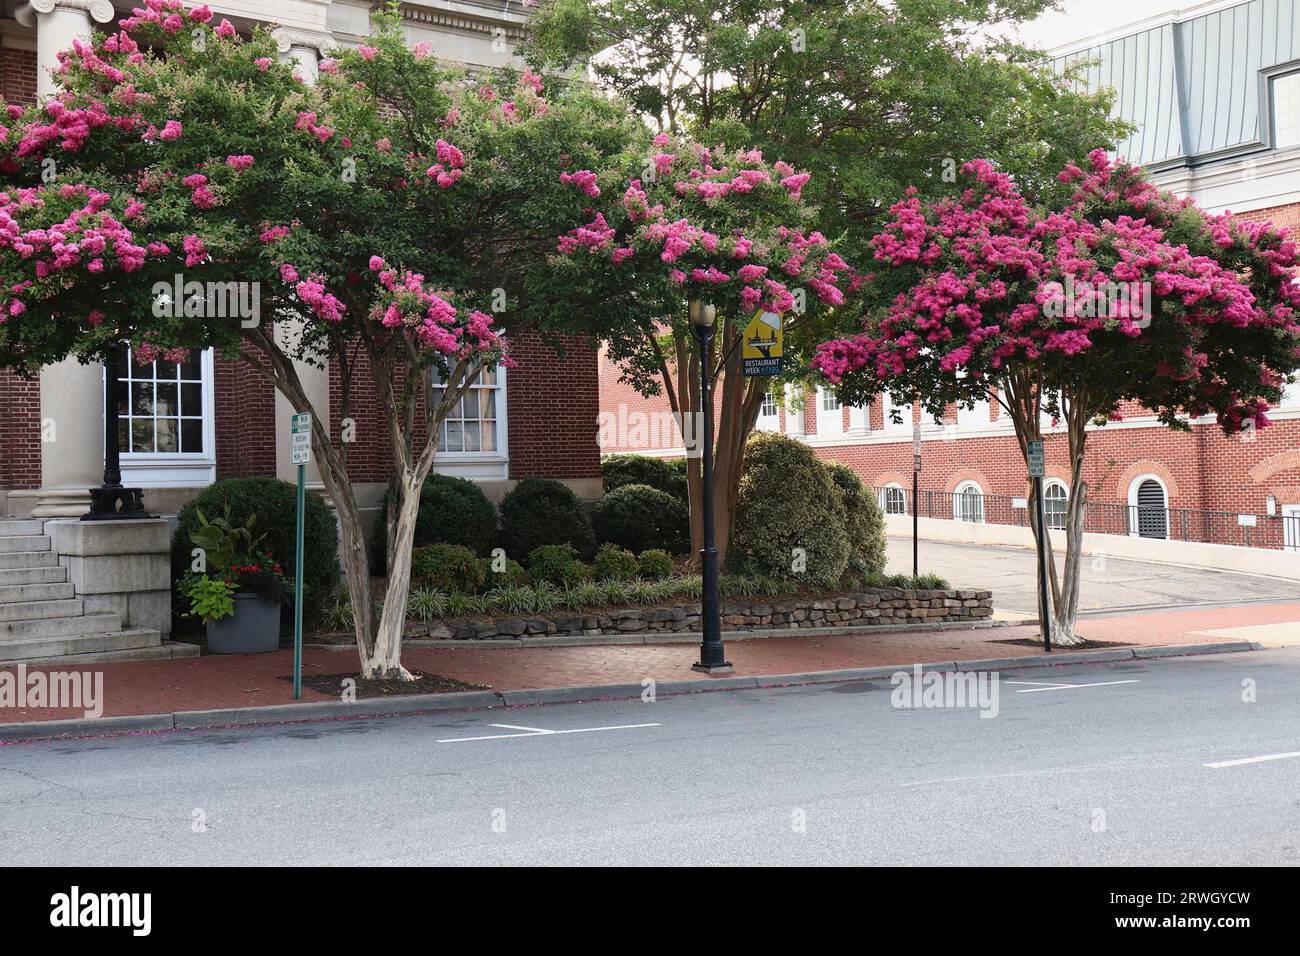 Pink Crepe Myrtle Trees Along a Street in USA Stock Photo